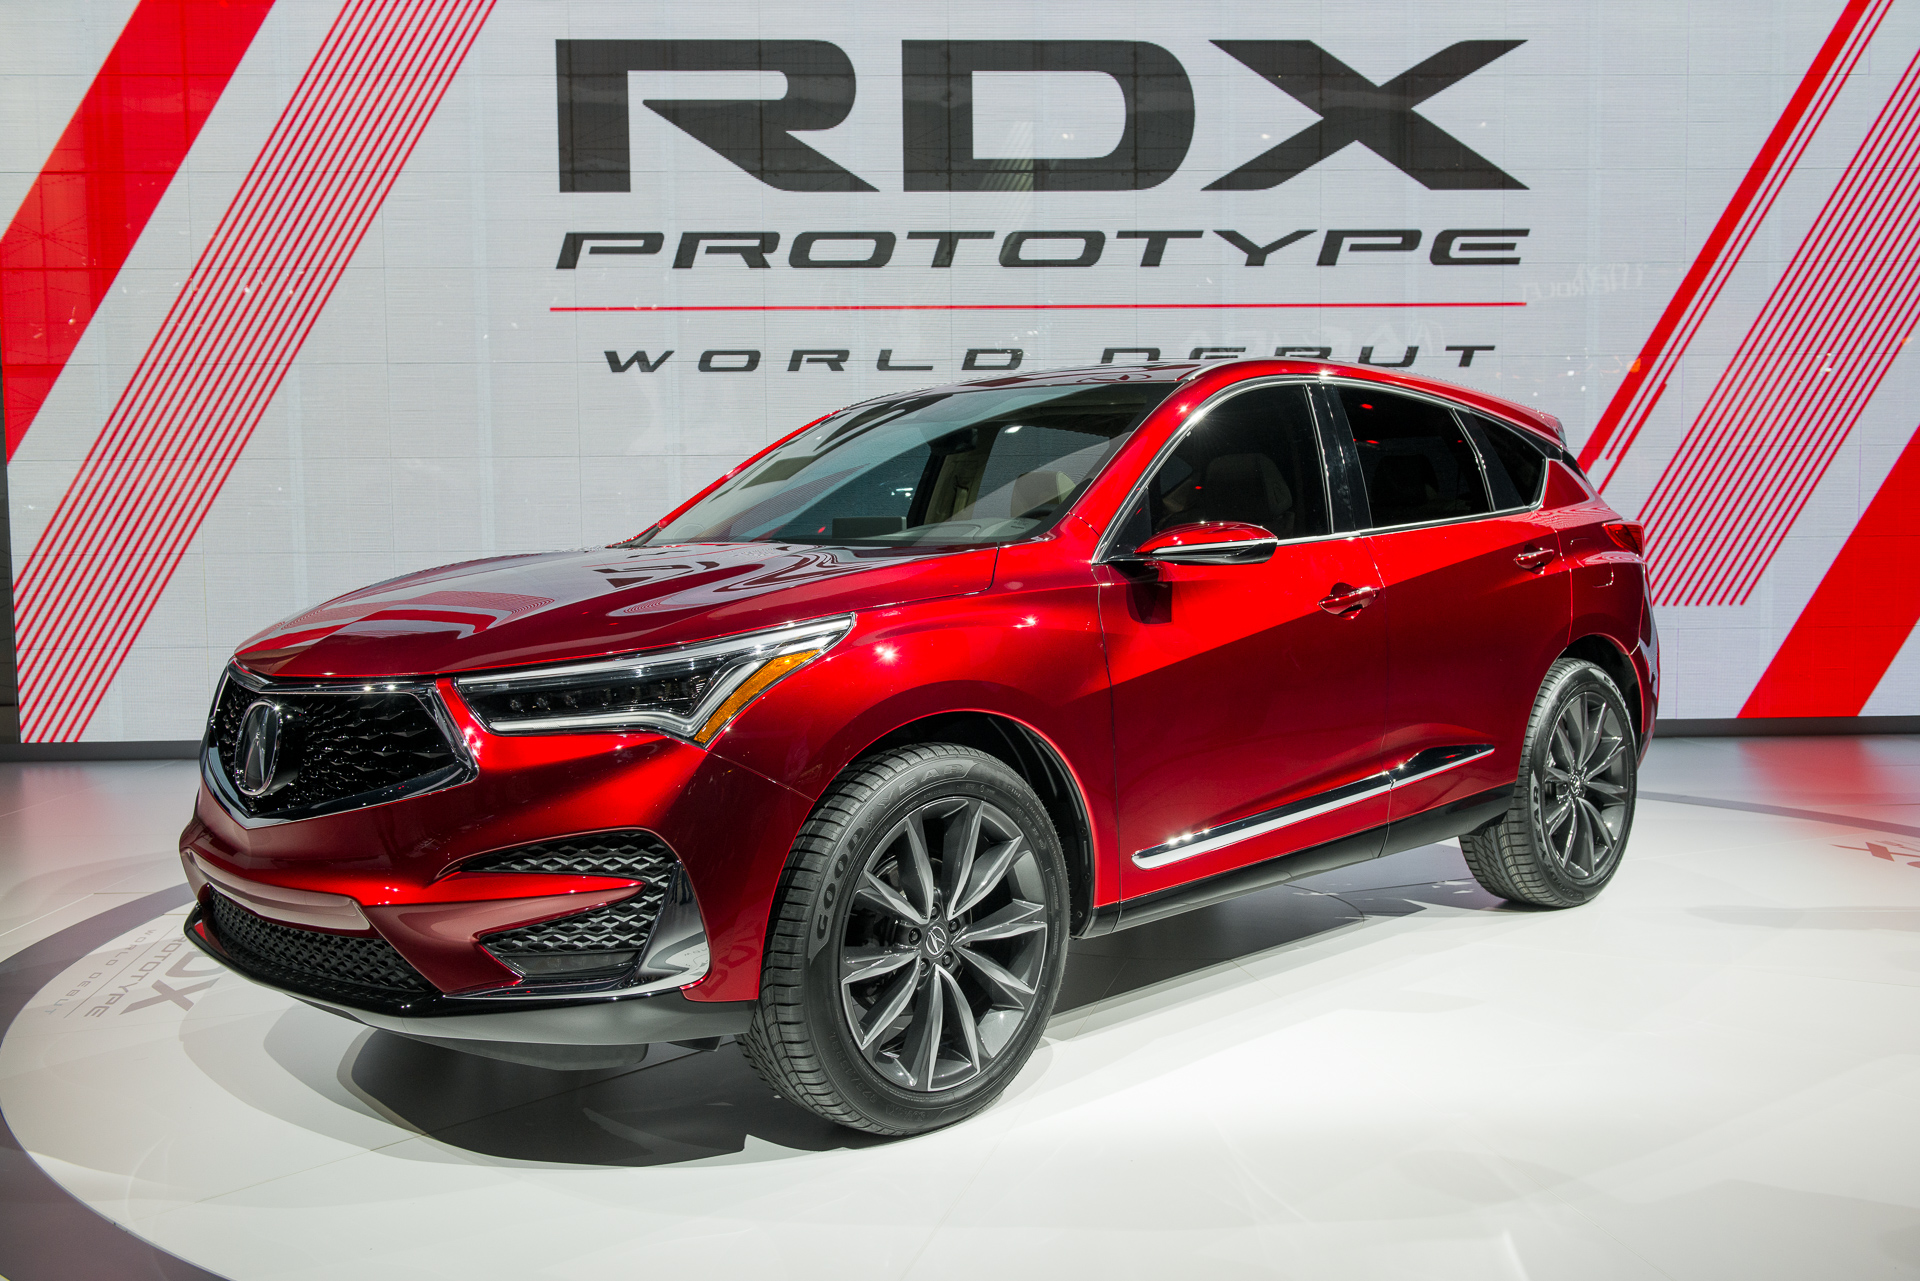 Acura RDX prototype is a thinly veiled 2019 RDX that puts luxury rivals